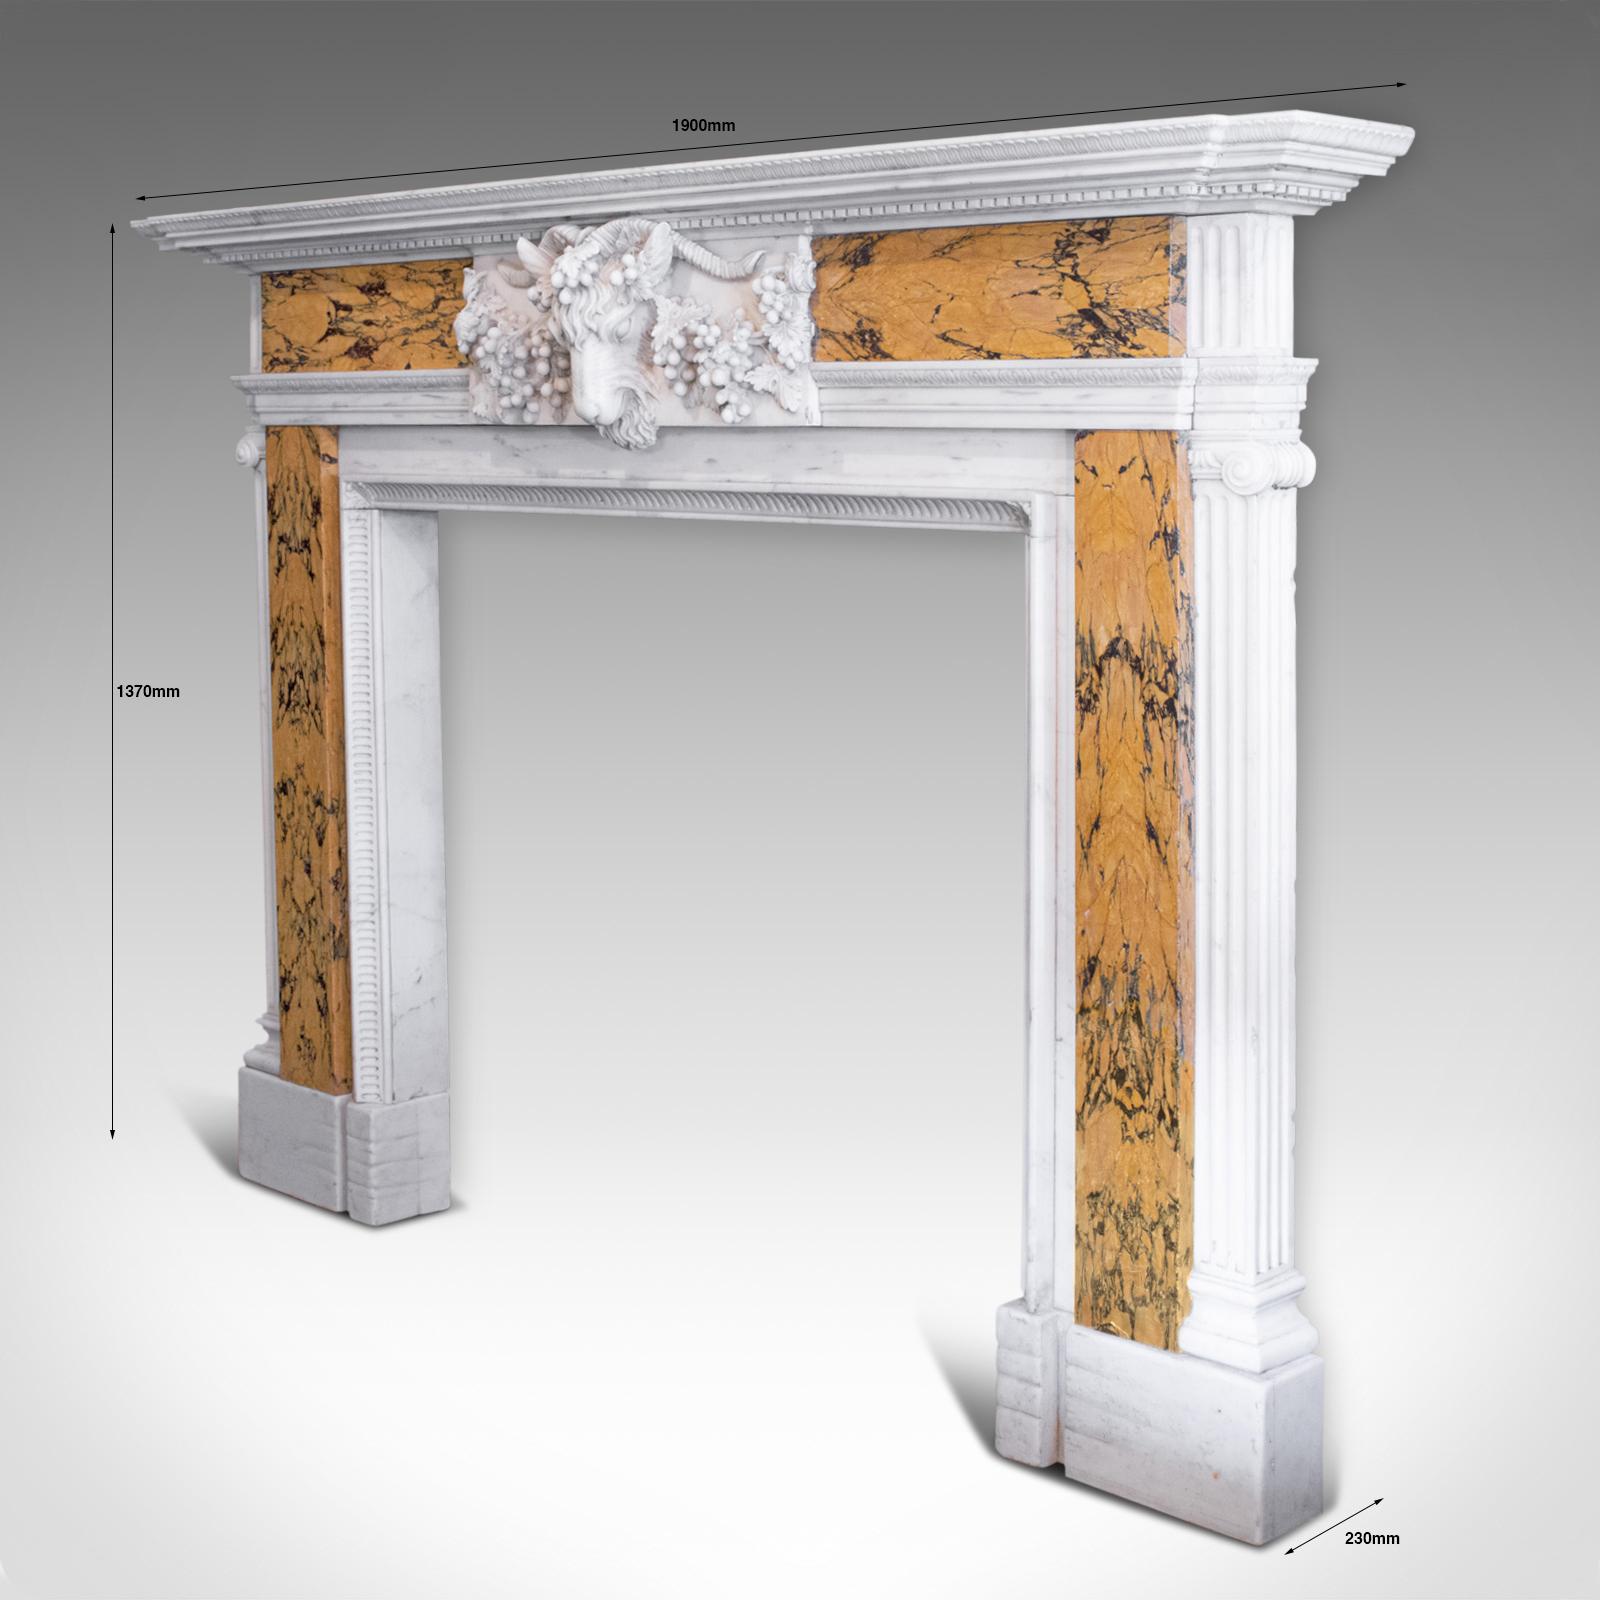 Georgian Revival Marble Fireplace, English, Fire Surround, Dominic Hurley In Good Condition For Sale In Hele, Devon, GB